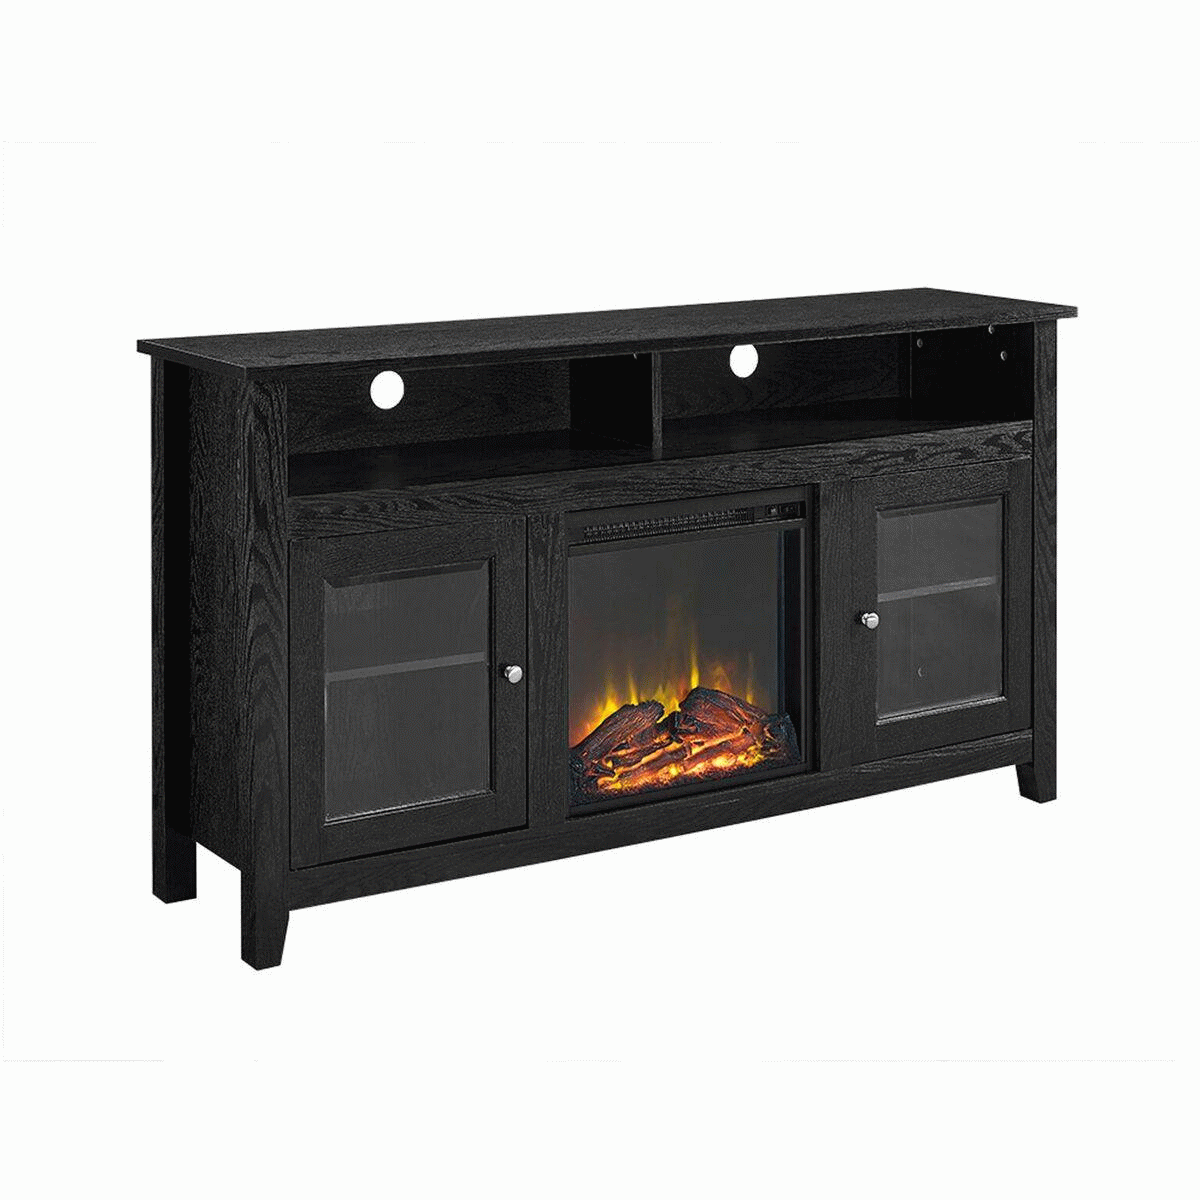 58" Wood Highboy Fireplace Tv Stand In Black – Walker Edison W58fp18hbbl With Wood Highboy Fireplace Tv Stands (View 16 of 20)